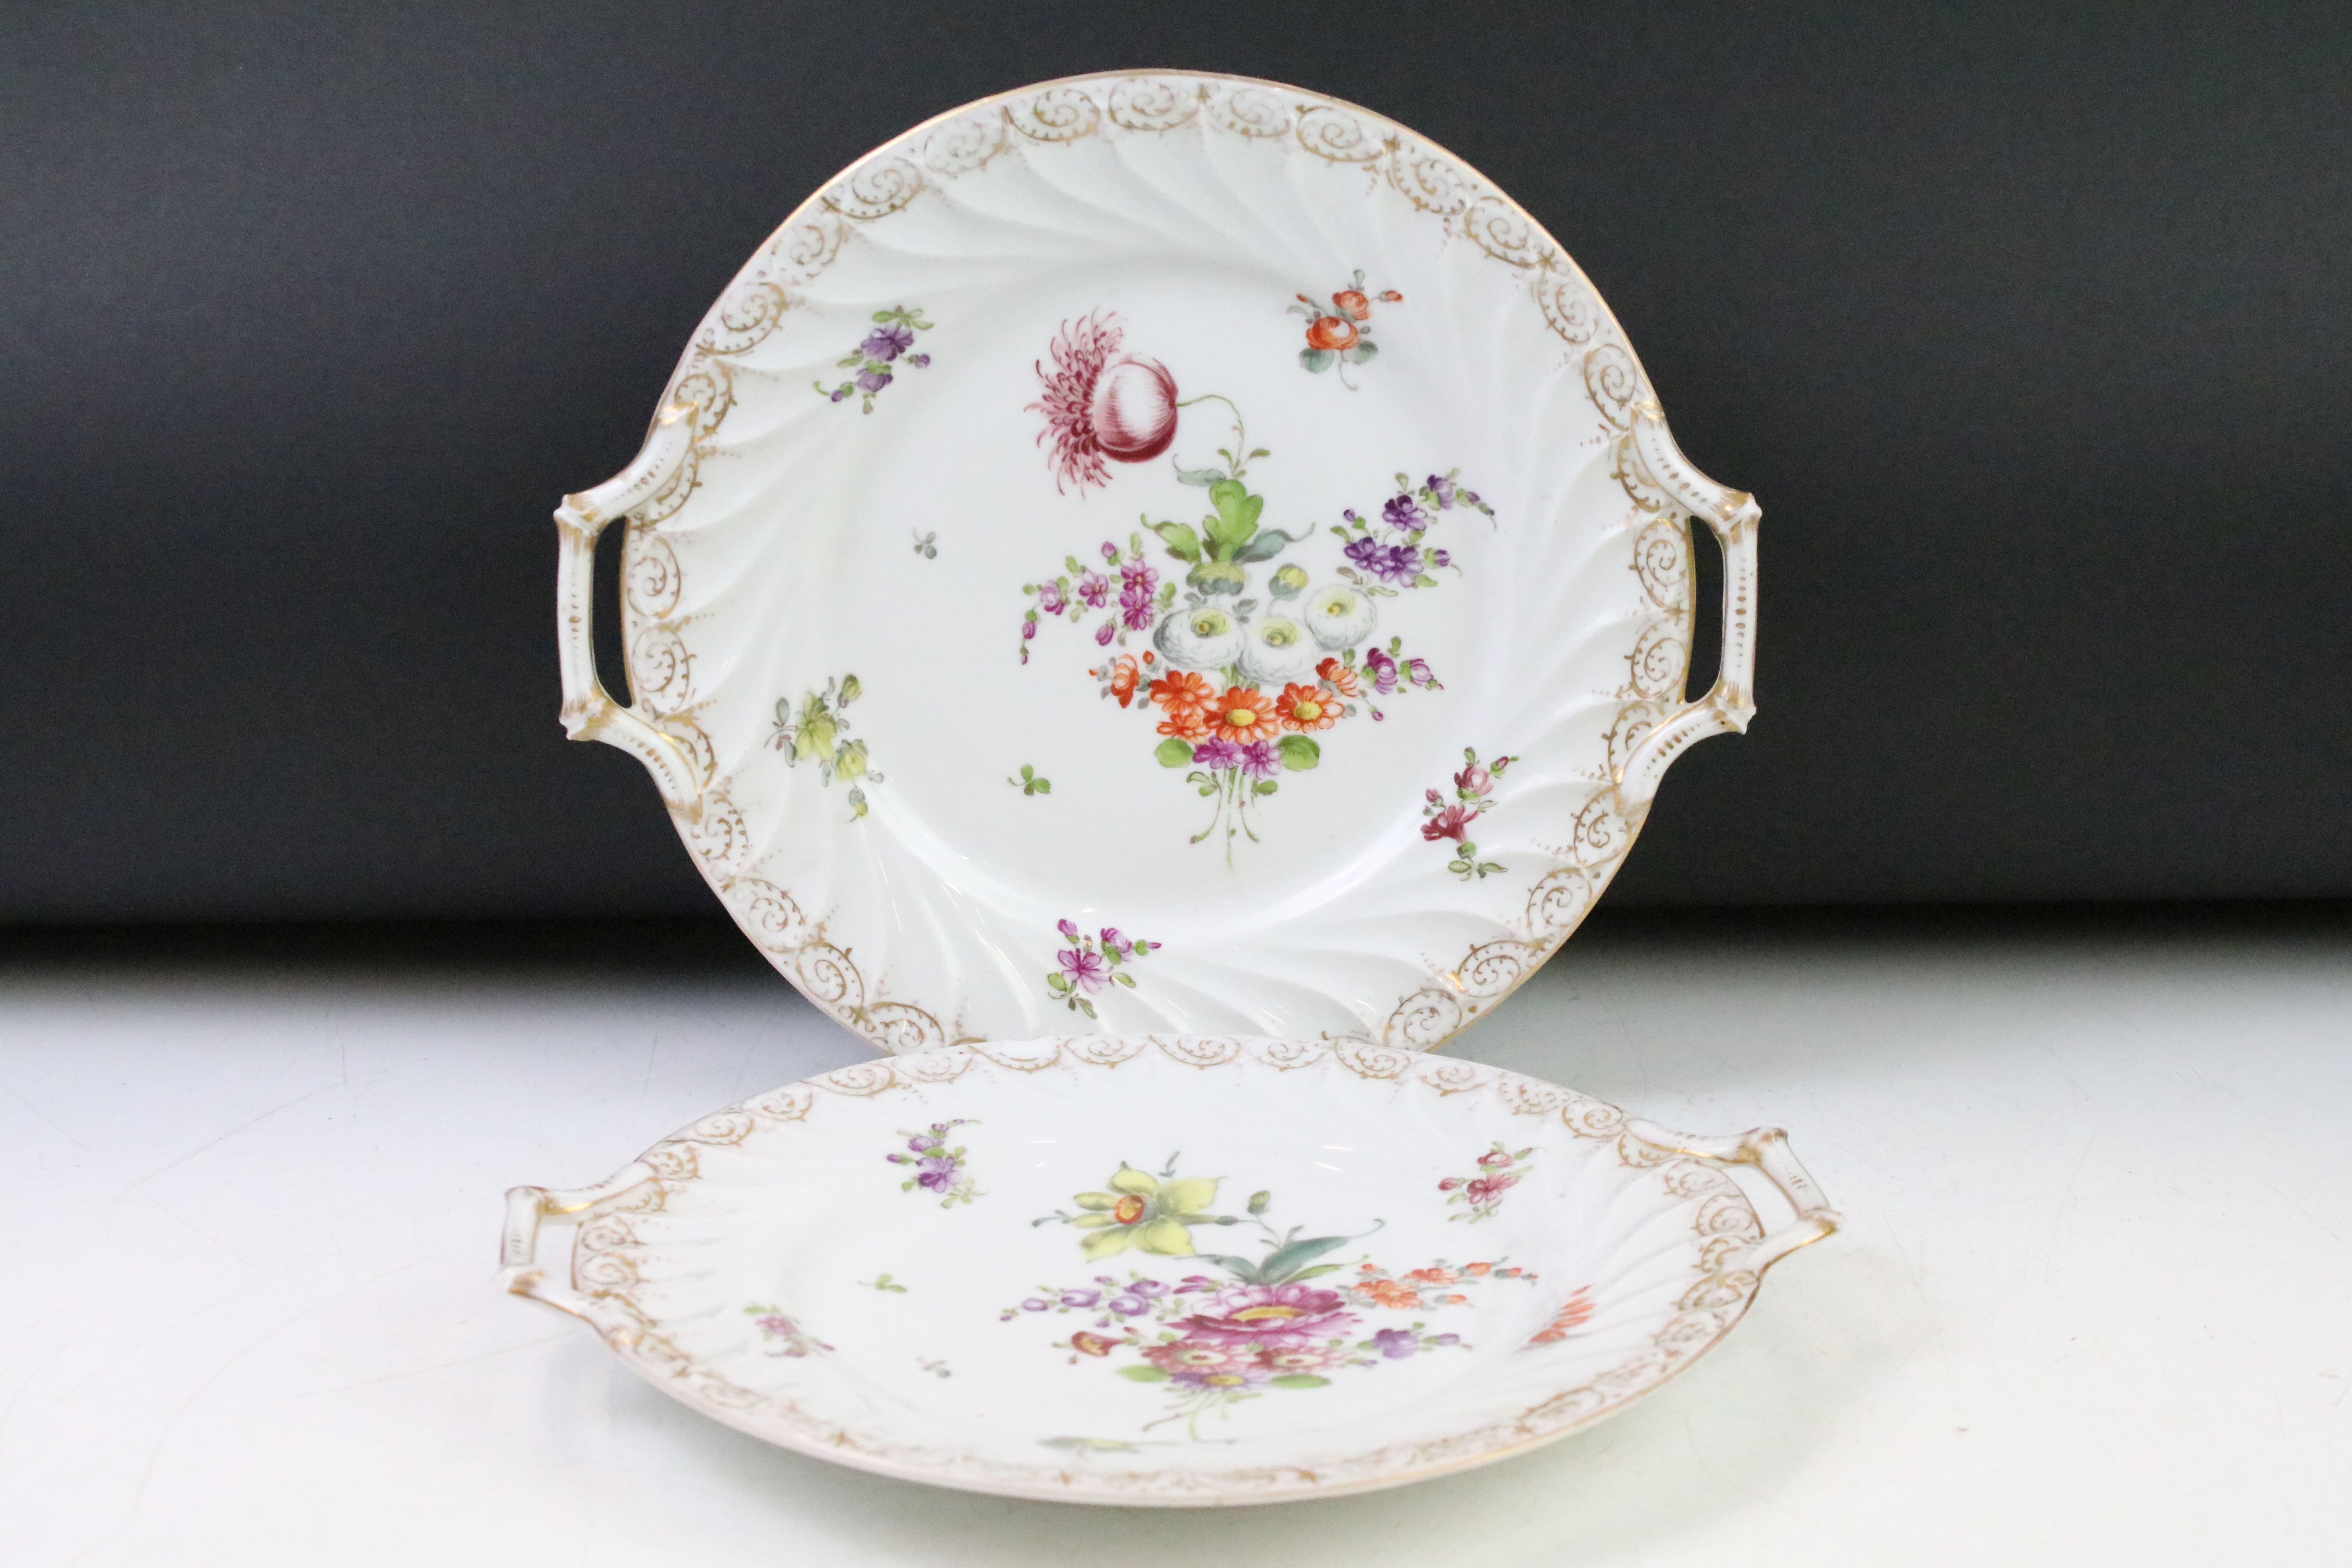 Two Dresden porcelain twin handled plates with hand painted floral decoration and gilt detail to